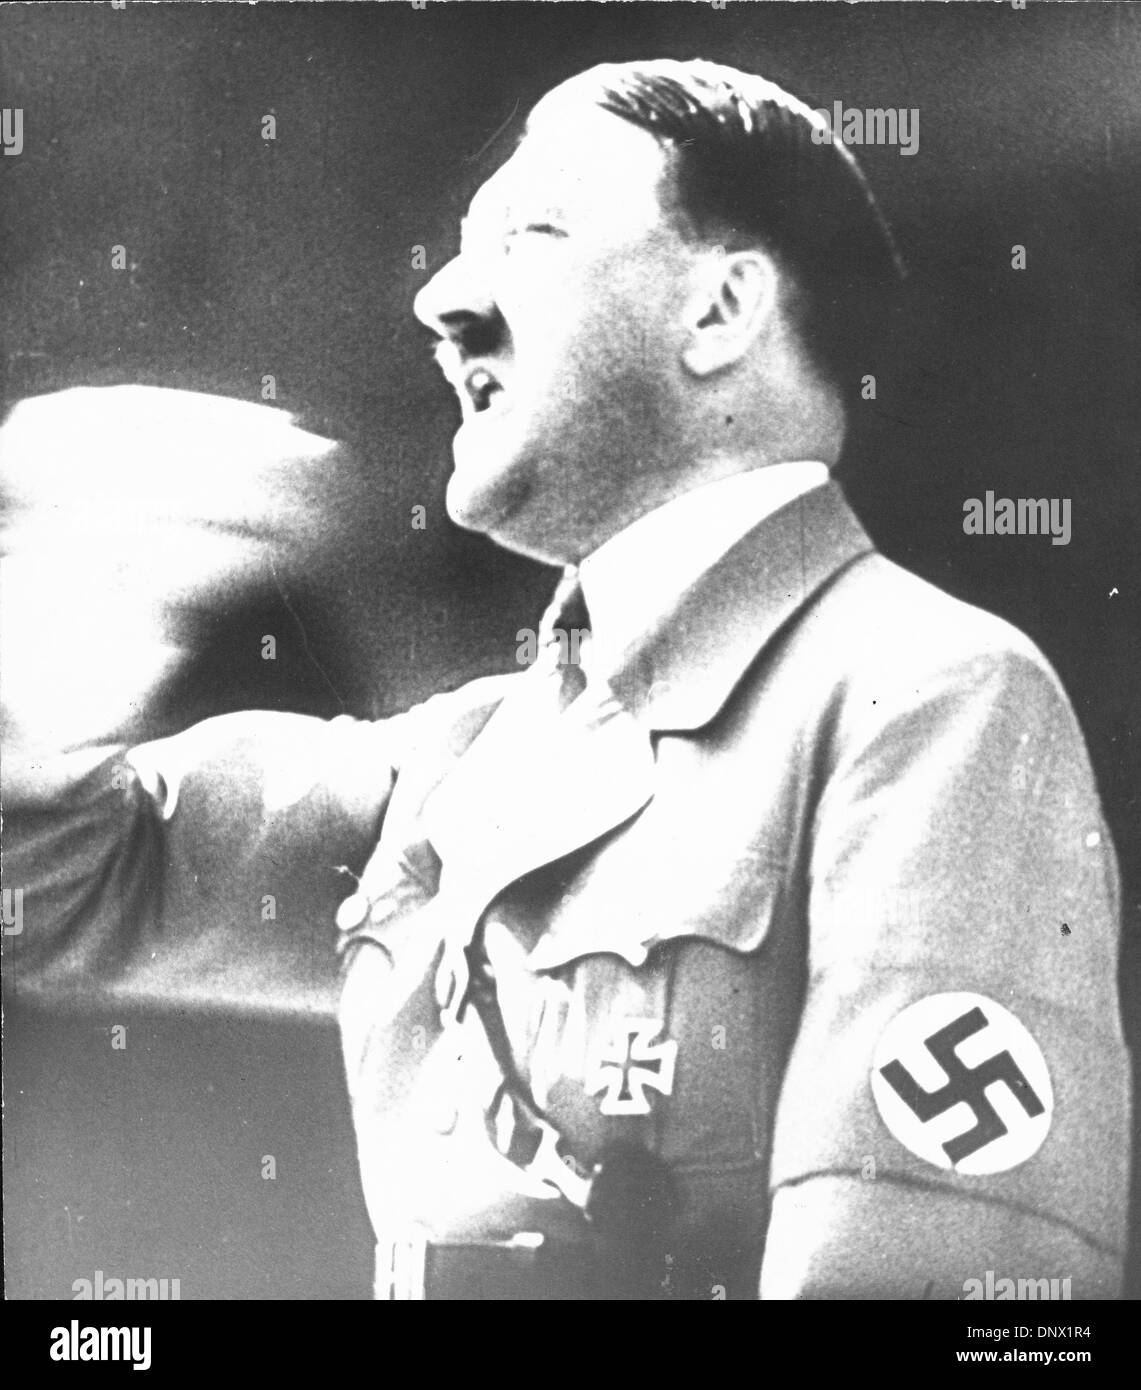 Feb. 15, 1933 - Berlin, Germany - ADOLF HITLER (1889-1945) the leader of Germany from 1933 until his death in 1945, and the leader of the National Socialist Workers Party (Nazi Party). (Credit Image: © KEYSTONE Pictures USA/ZUMAPRESS.com) Stock Photo